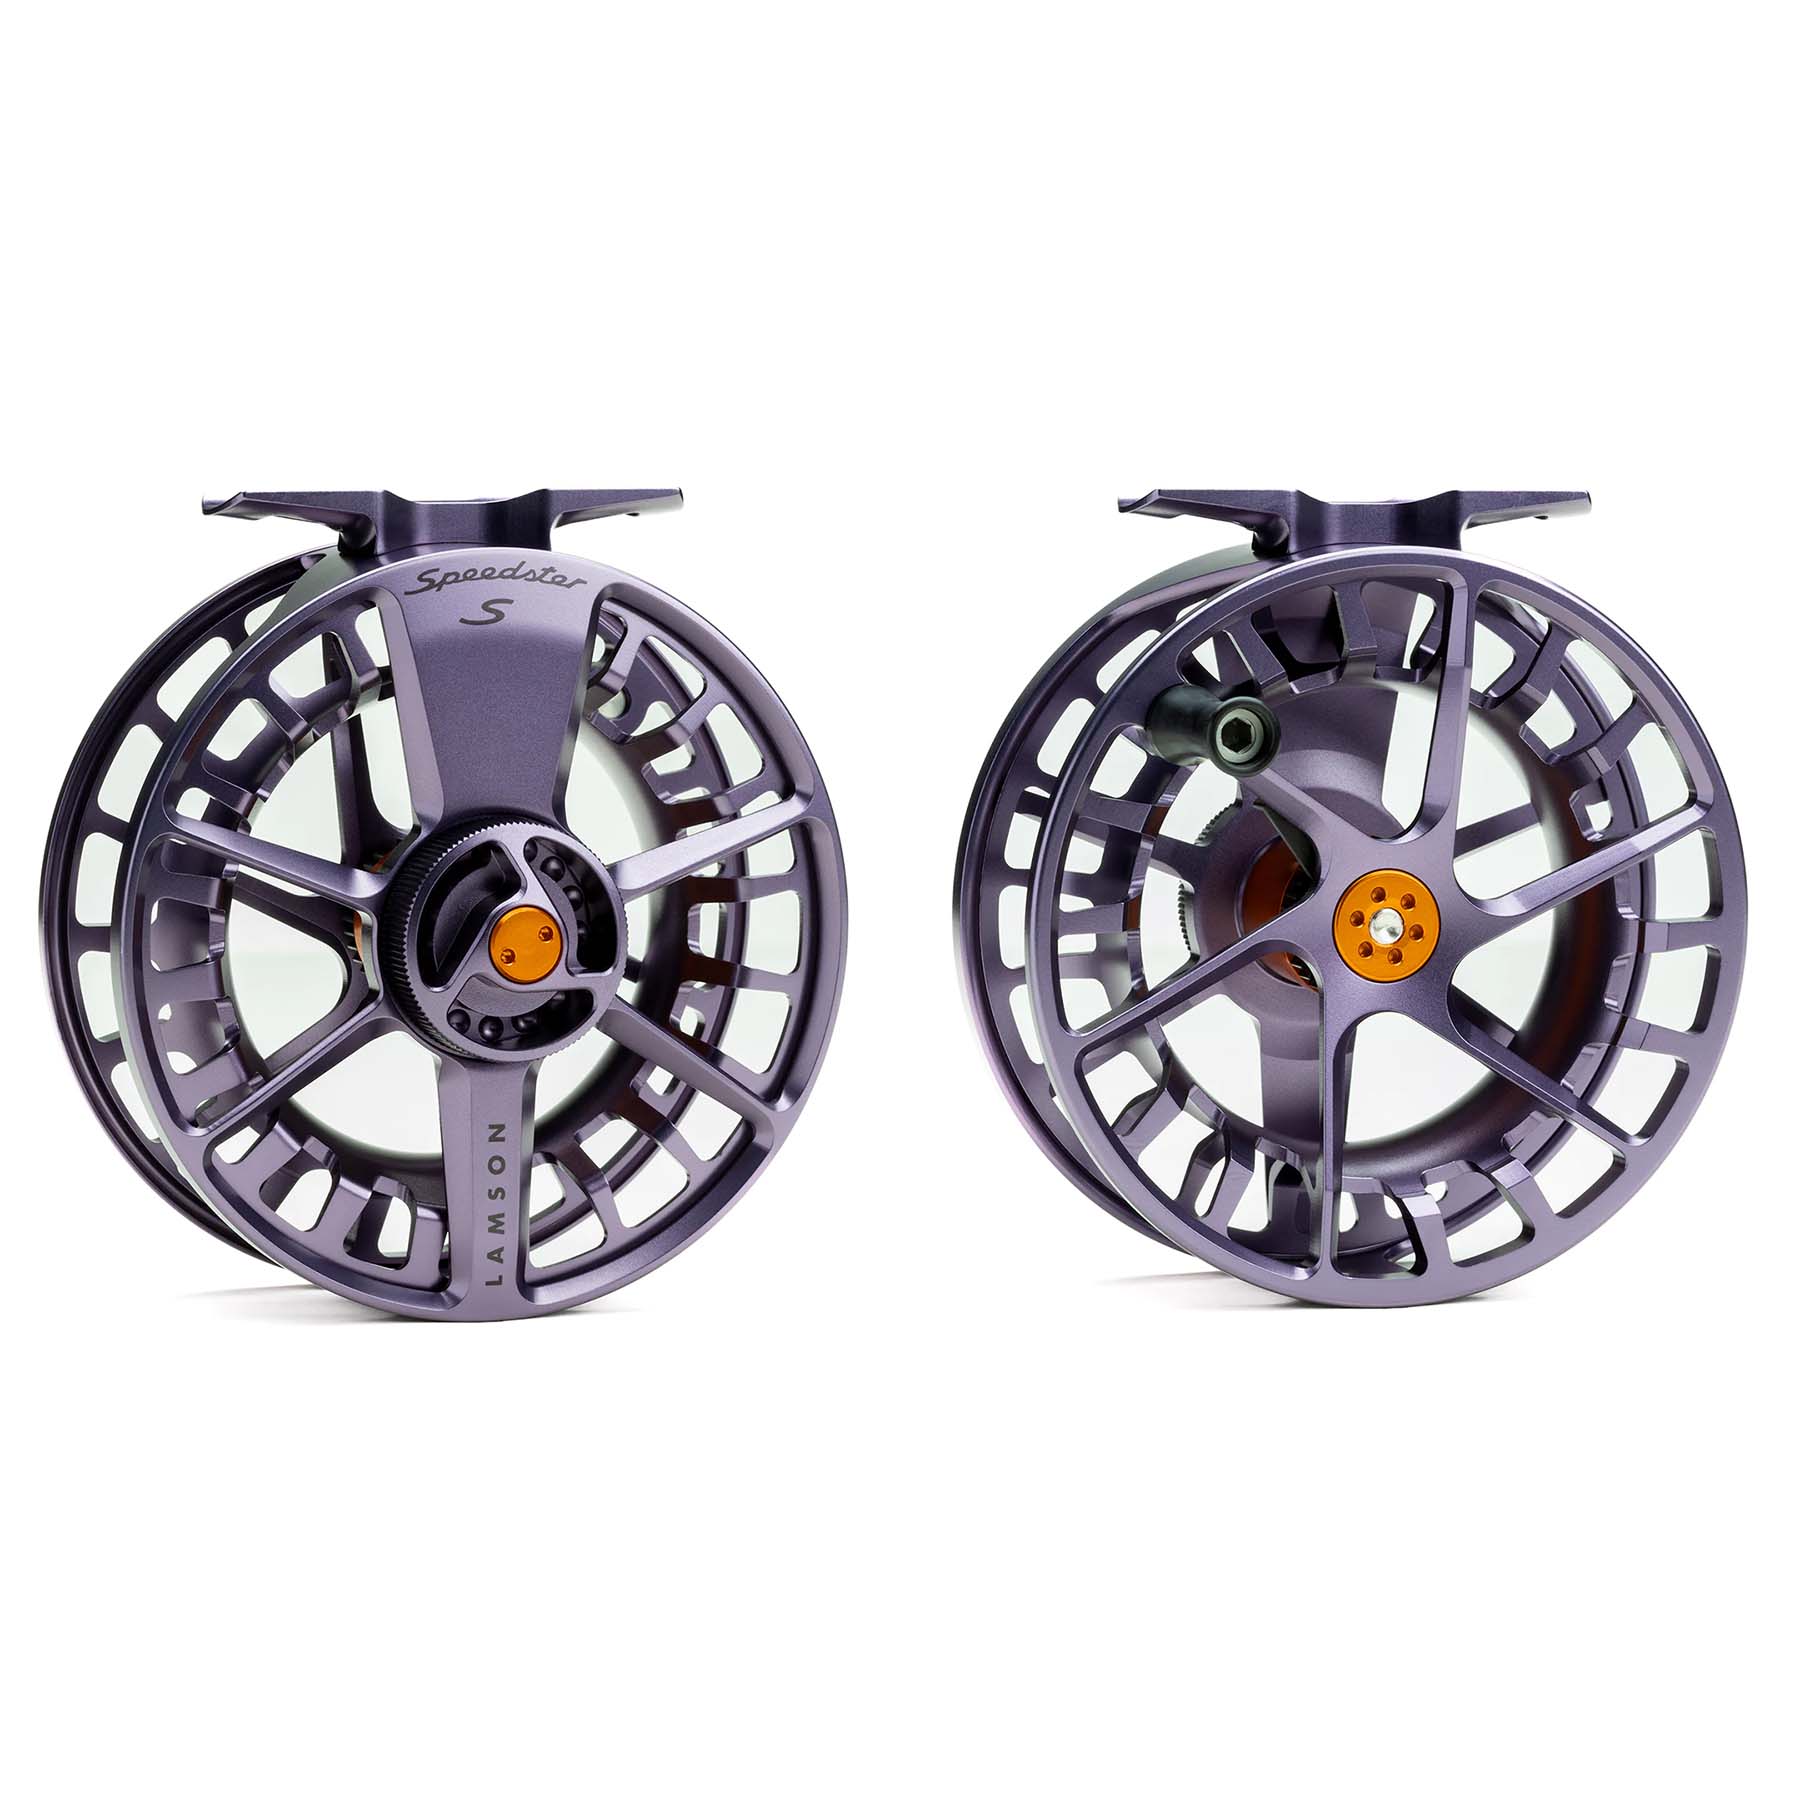 Lamson Speedster S Steve Periwinkle Limited Edition Fly Fishing